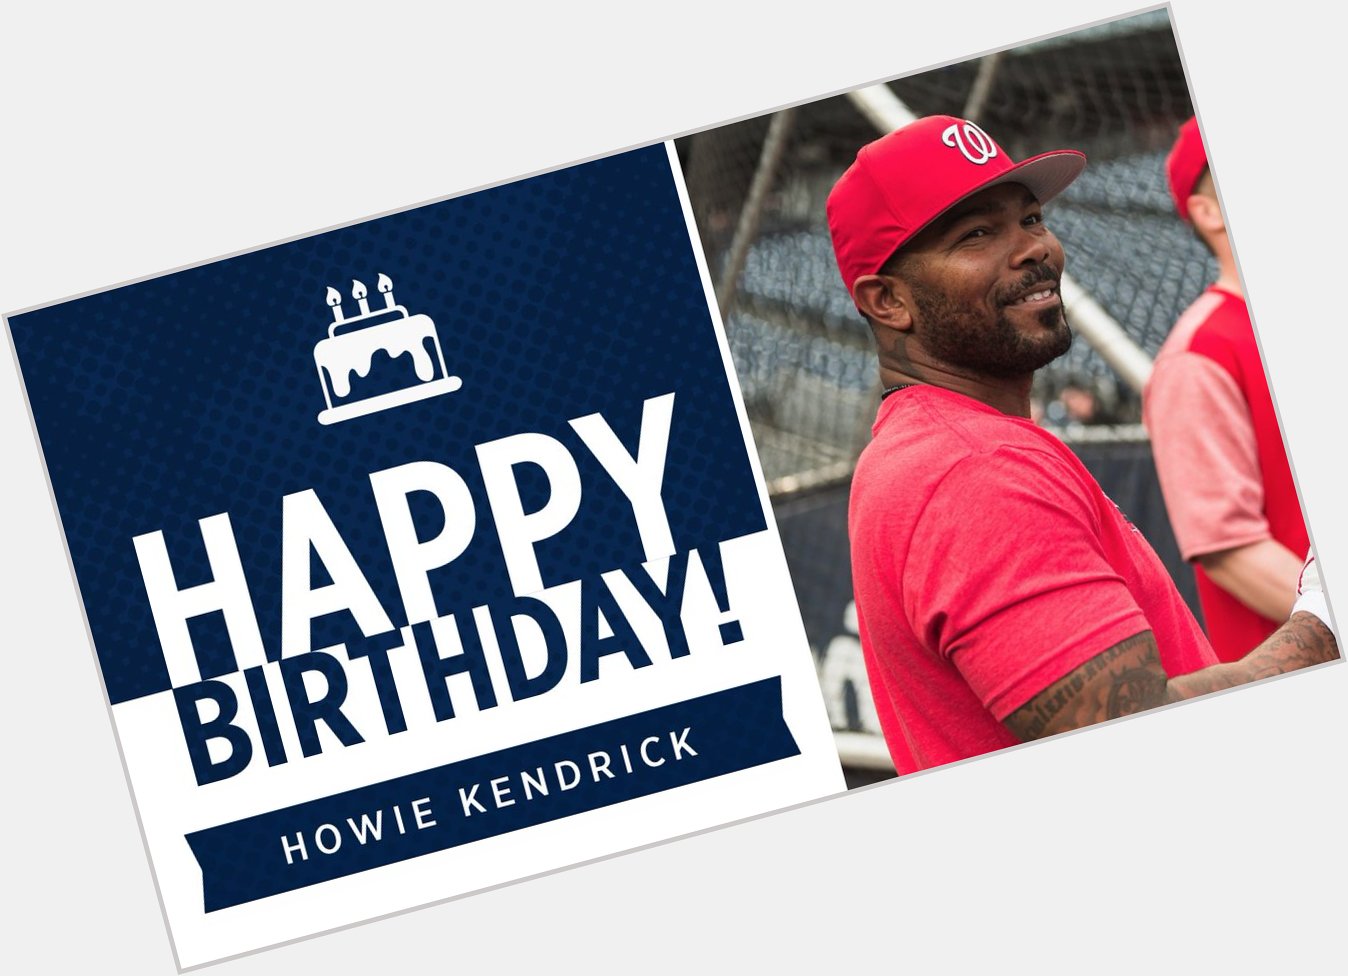 Join us in wishing Howie Kendrick a very happy birthday! 